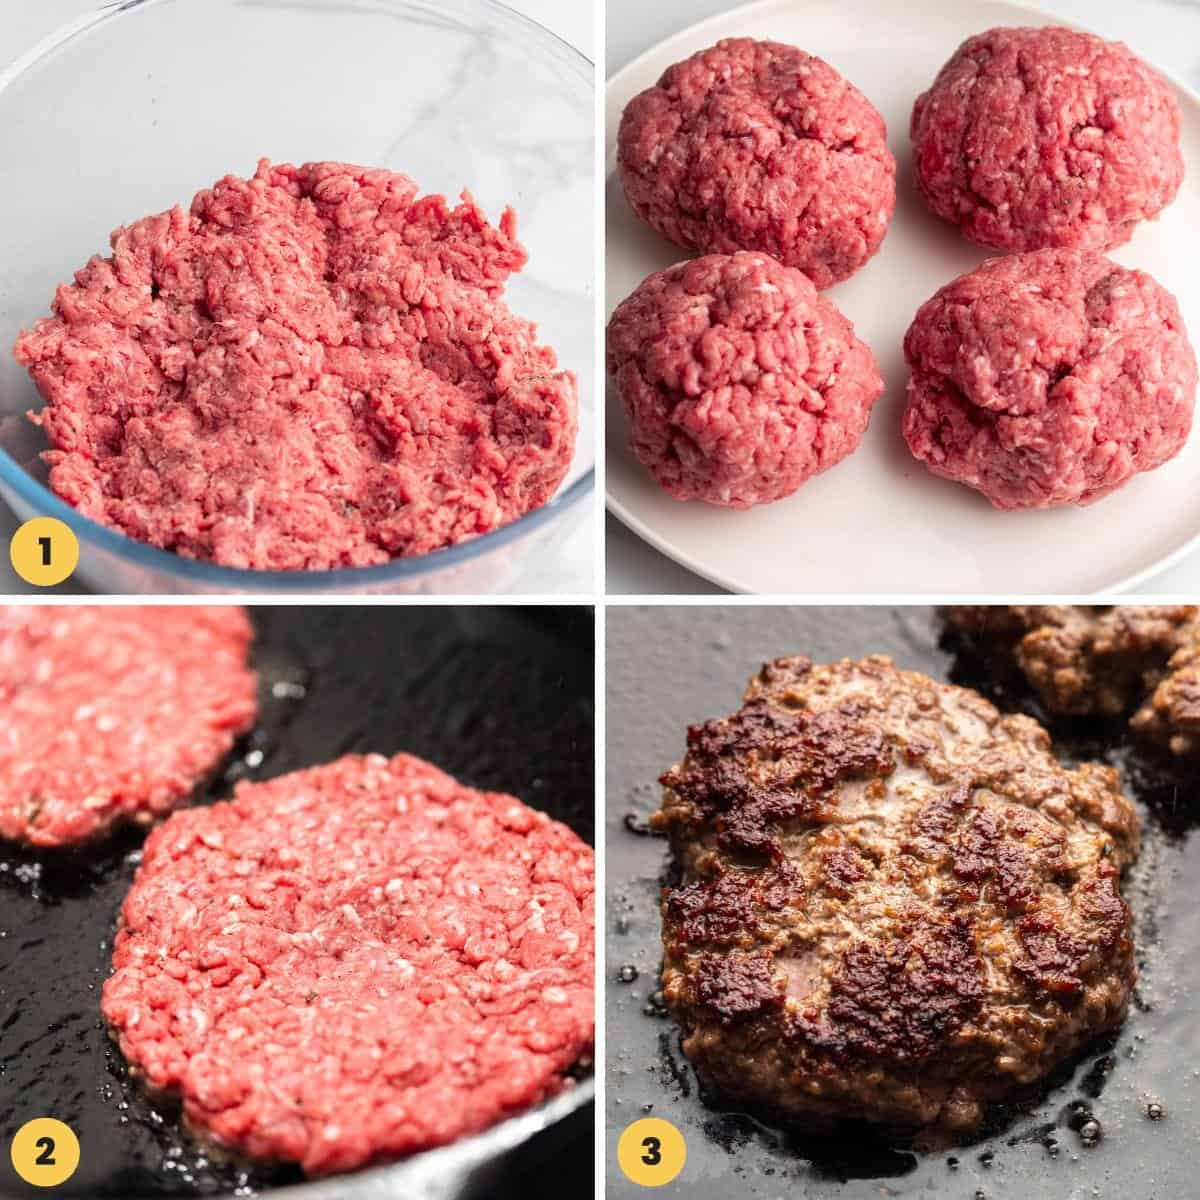 How to Make a Burger on the Stove